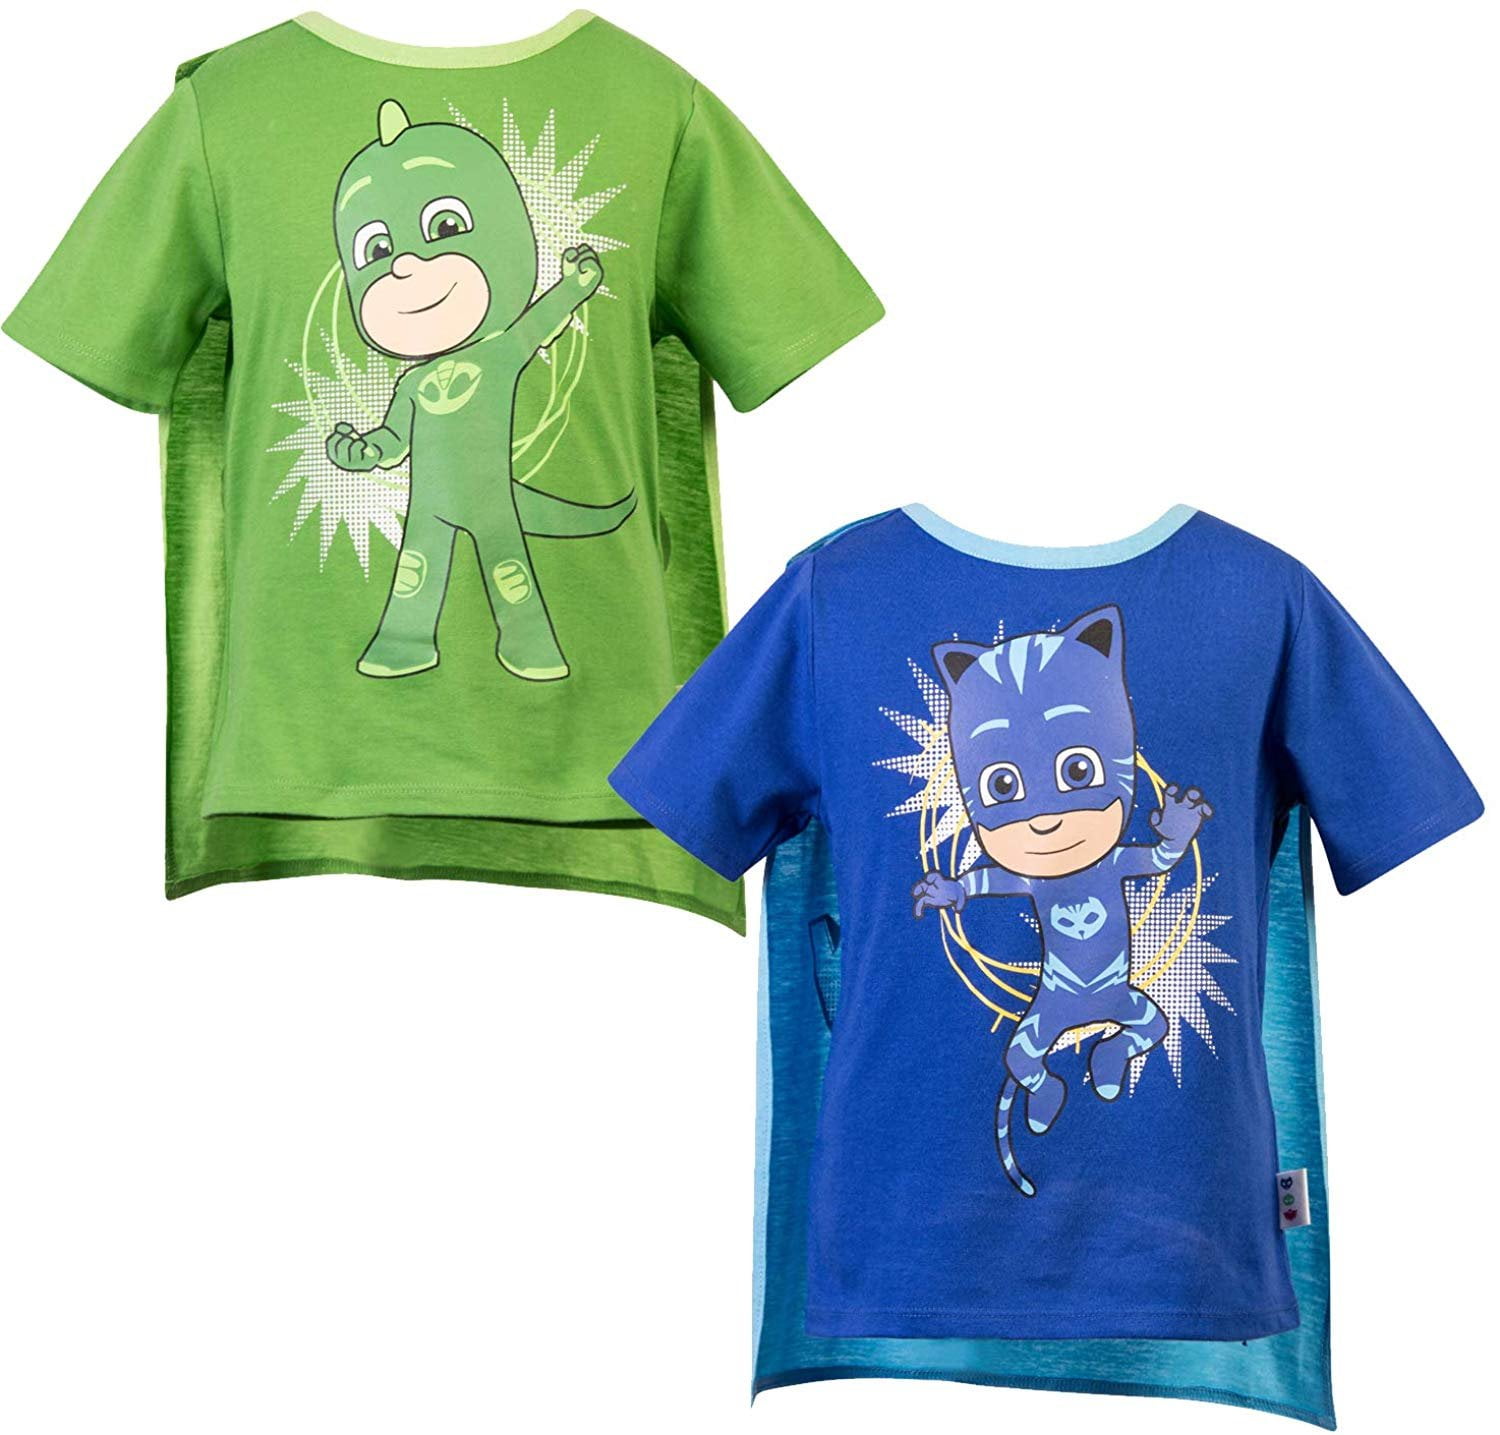 PJ Masks Catboy Boys Licensed tee t shirt top long sleeve New with tags